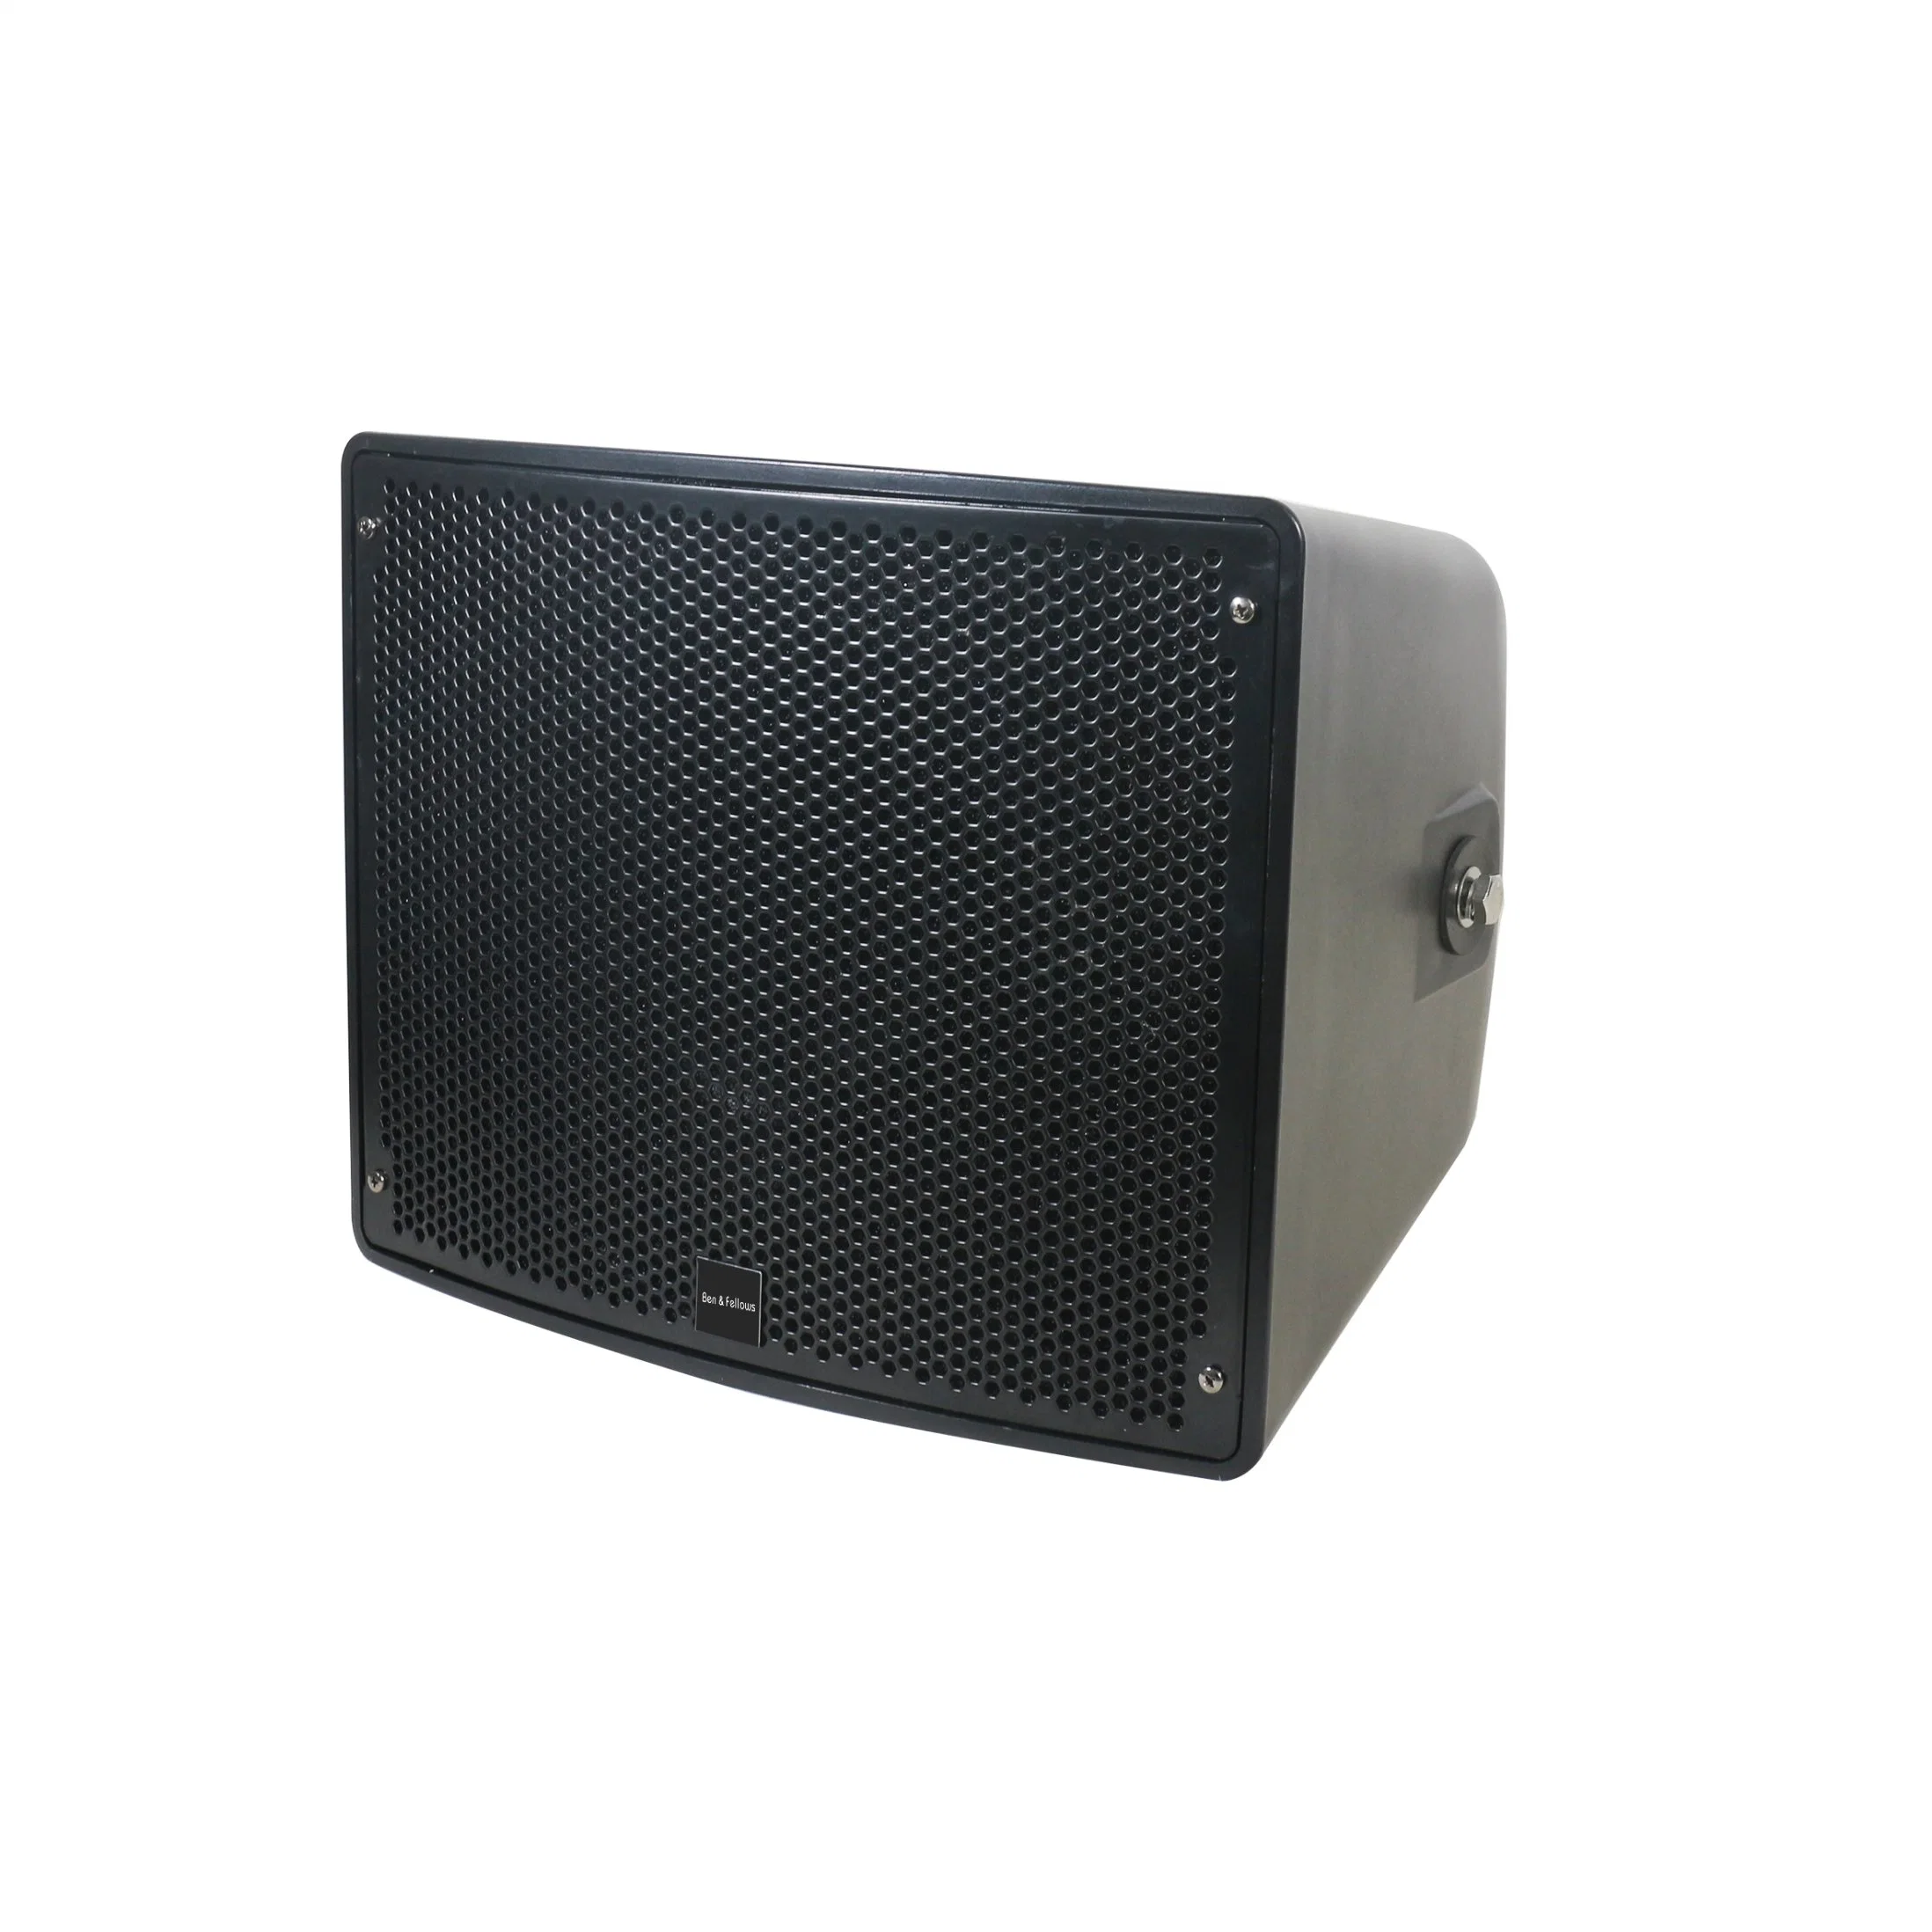 200W High Power Ultra-Compact Coaxial 100V Two-Way All-Weather Horn Speaker, IP 55 for Outdoor Public Address PA System, Support IP/SIP protocol